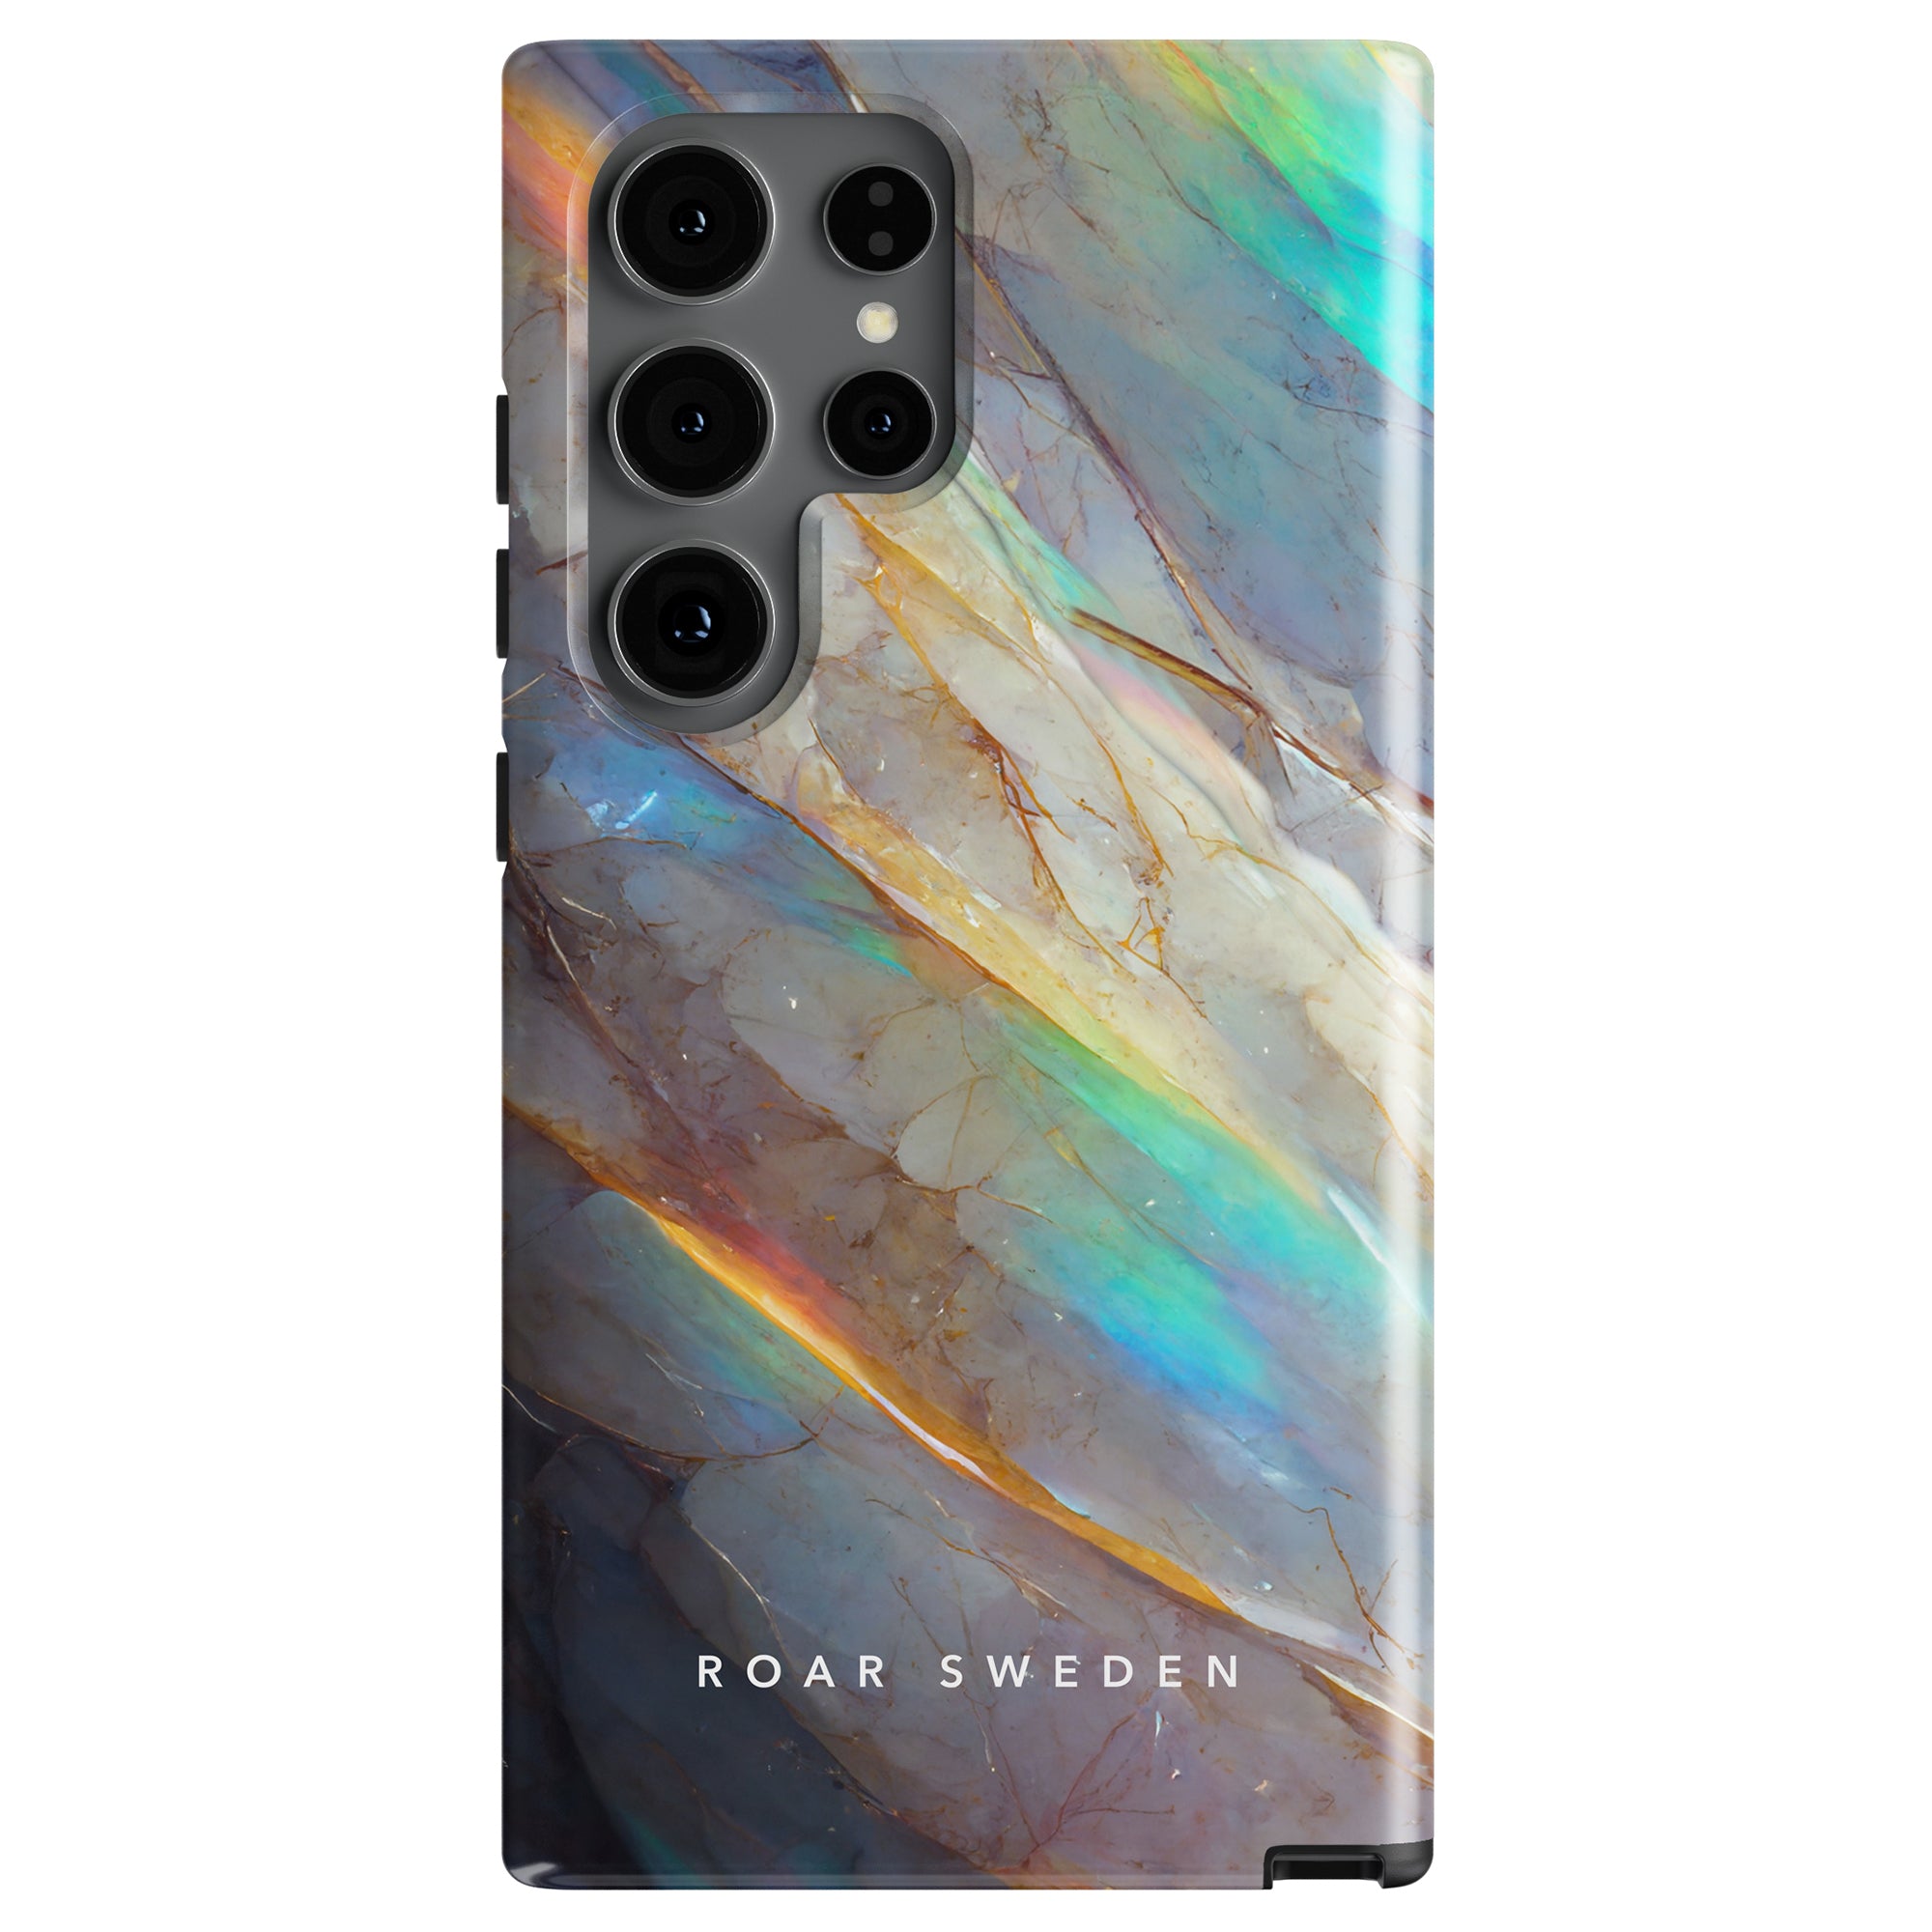 A smartphone case with a multi-color marble pattern, featuring the brand name "ROAR SWEDEN" at the bottom. This Crystal - Tough Case offers robust skydd and modern estetik, with multiple openings for camera lenses on the top left side.